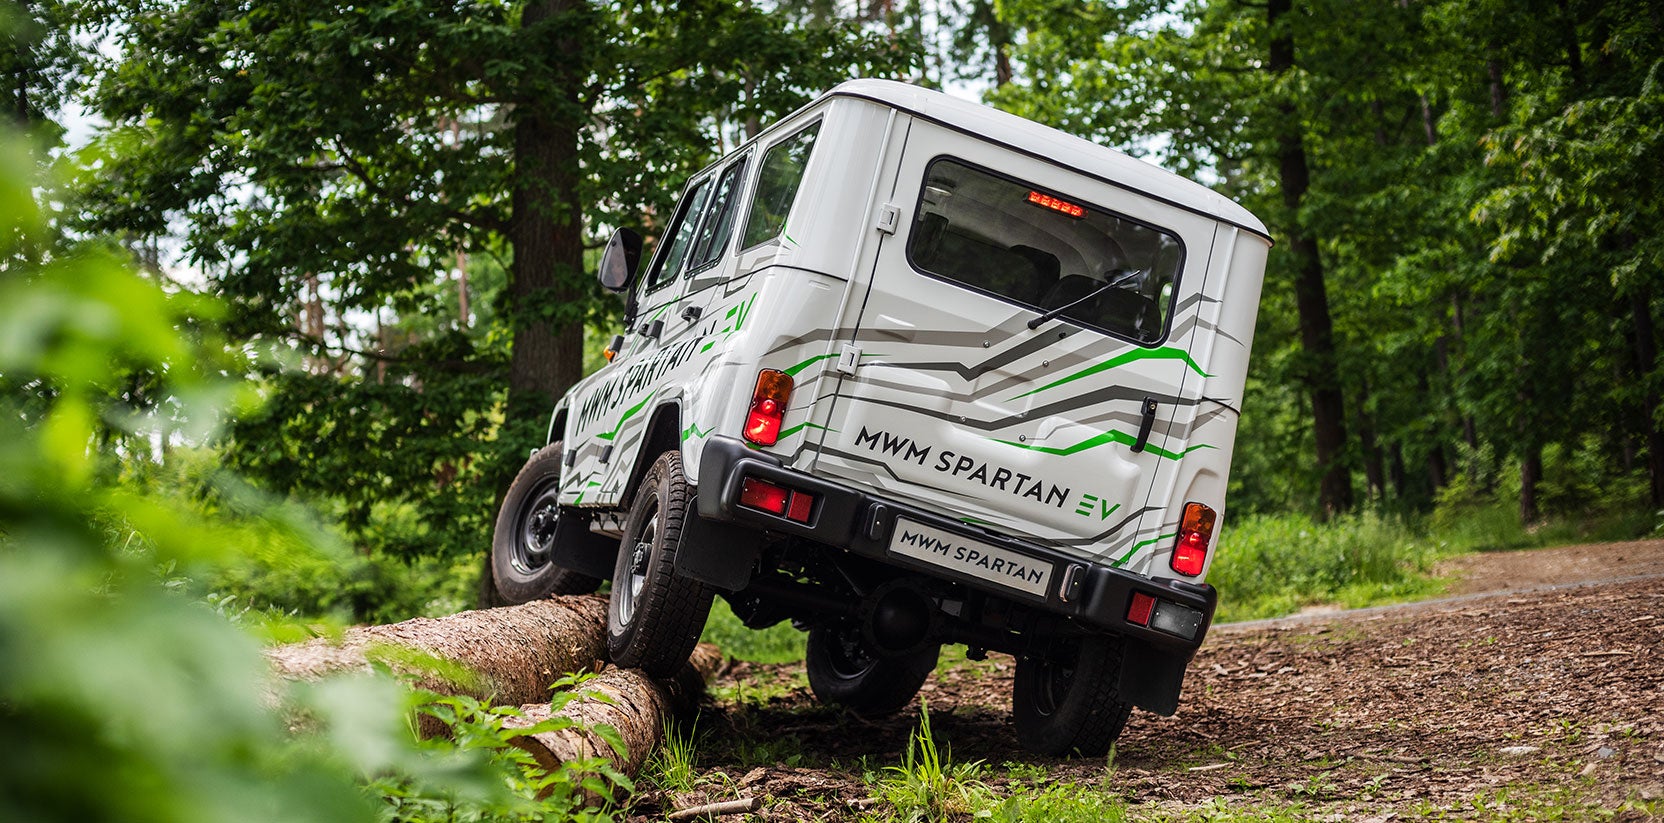 The MWM Spartan EV Updates A Soviet Off-Road Icon, But Doesn’t Come Cheap